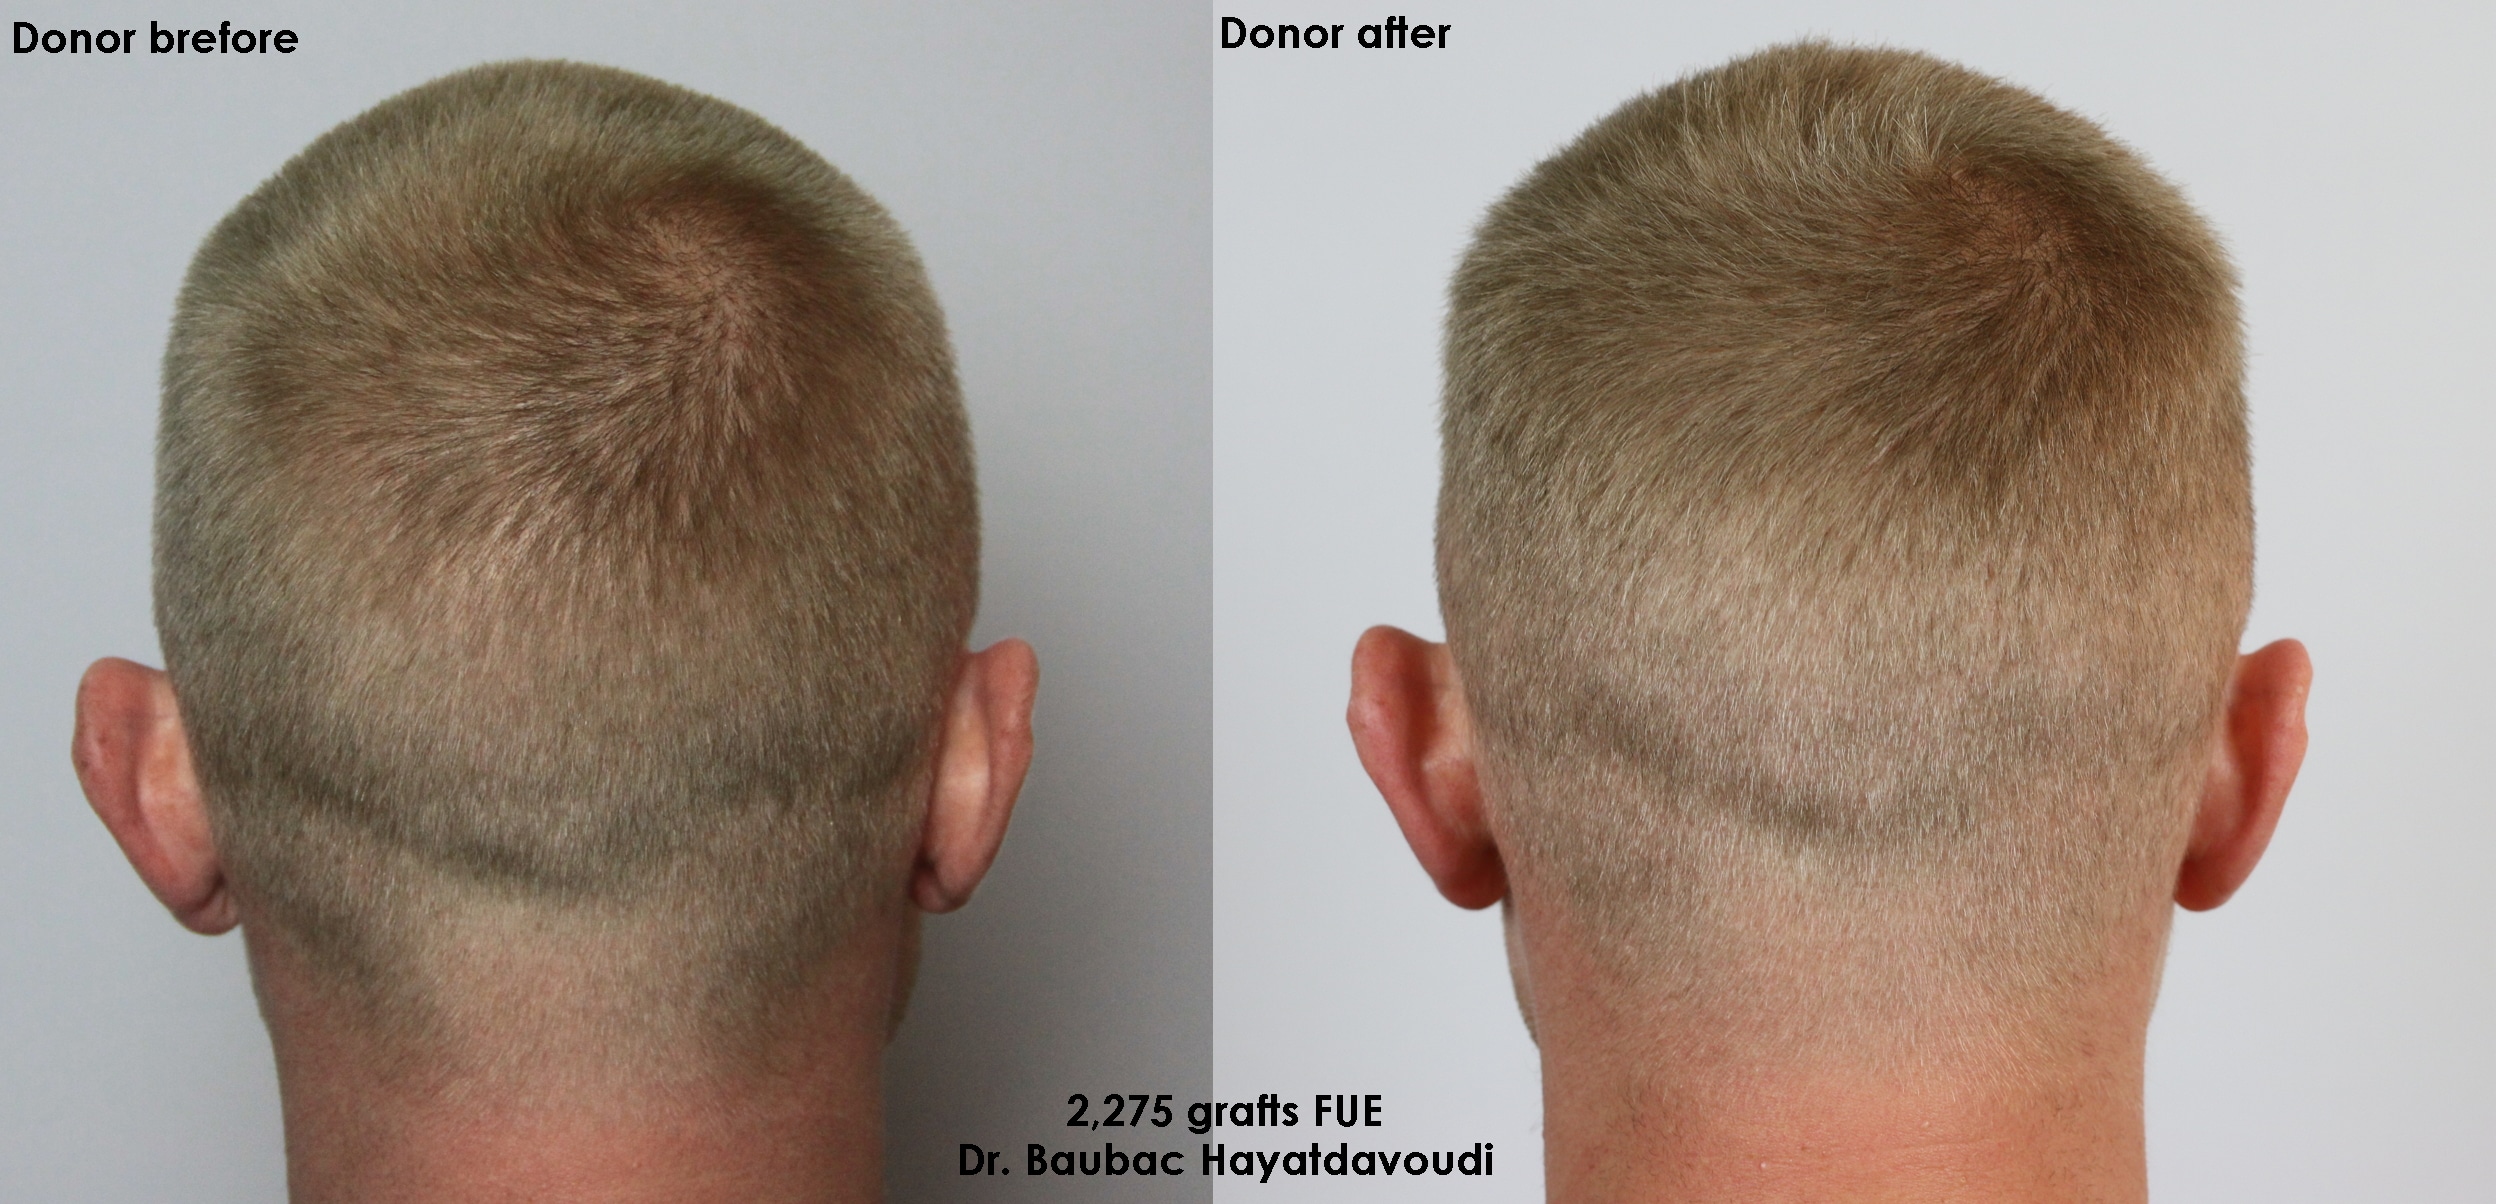 Case Study - Can I Wear My Hair Short After A Hair Transplant? - AlviArmani  - Hair Transplant Los Angeles